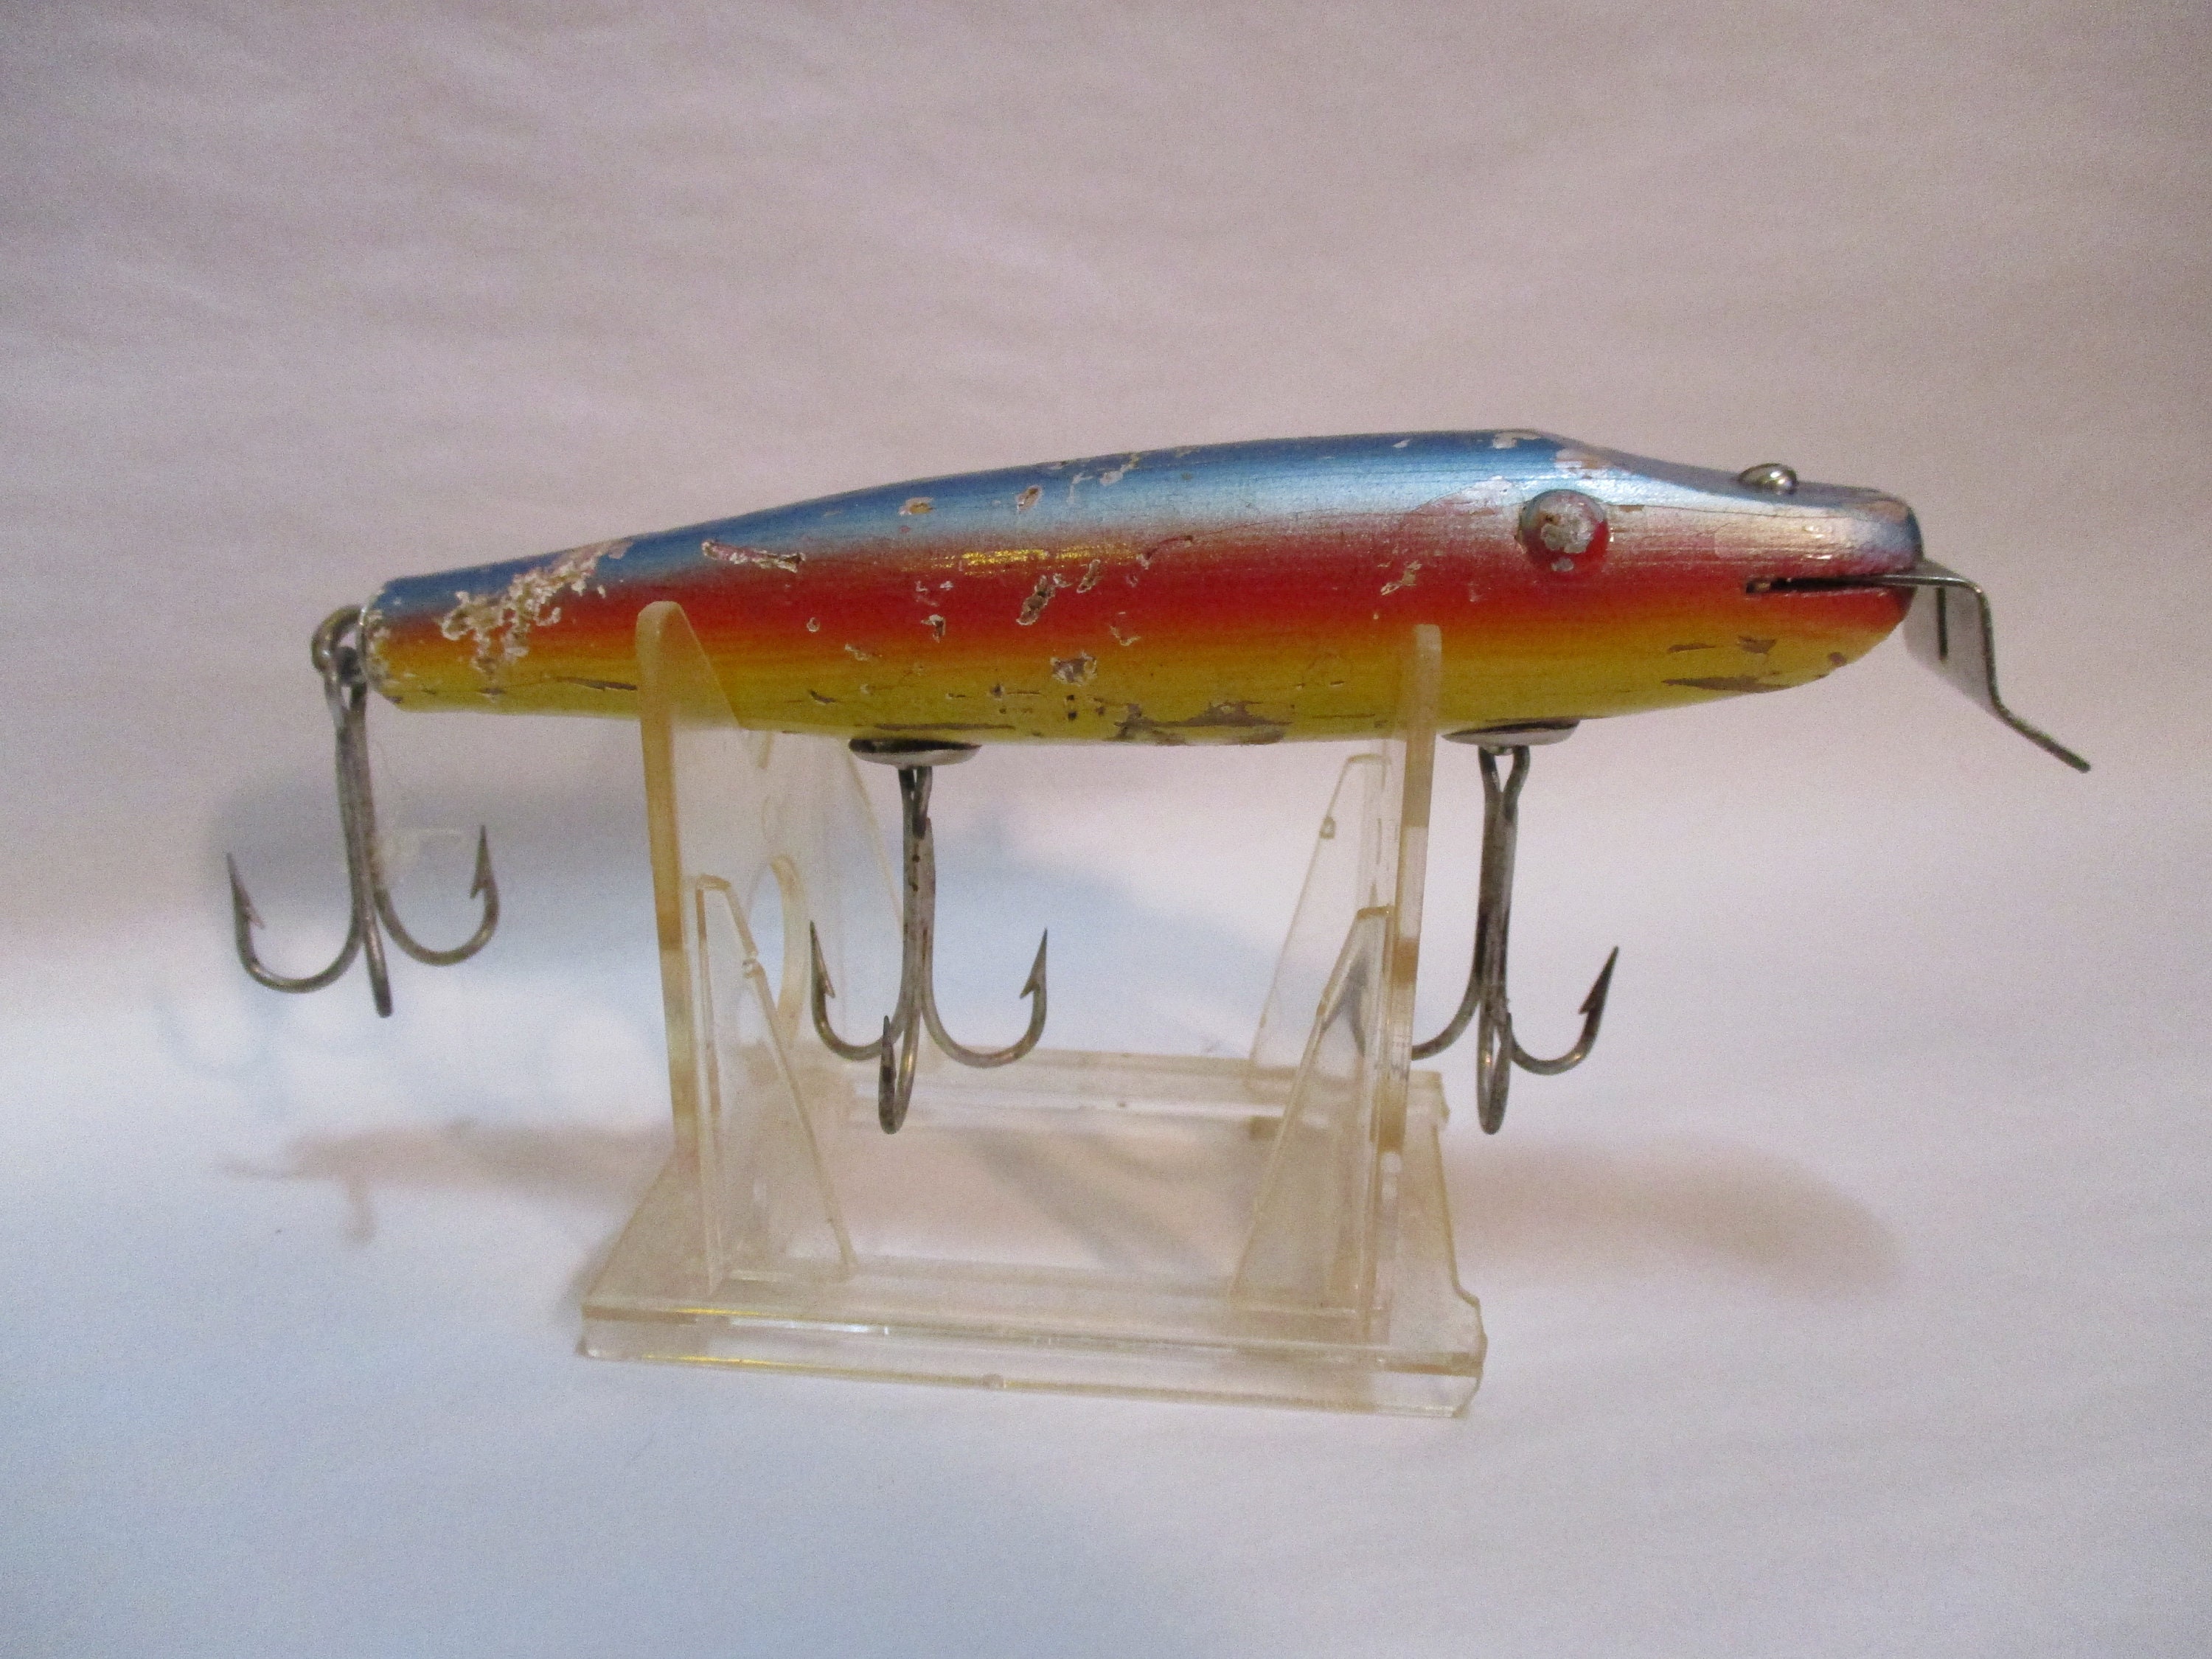 Vintage Wooden Fishing Lure, 4 1/4 Inch, Chub Pikie, Used, Repurpose,  Collect, Fishing Cabin Decor